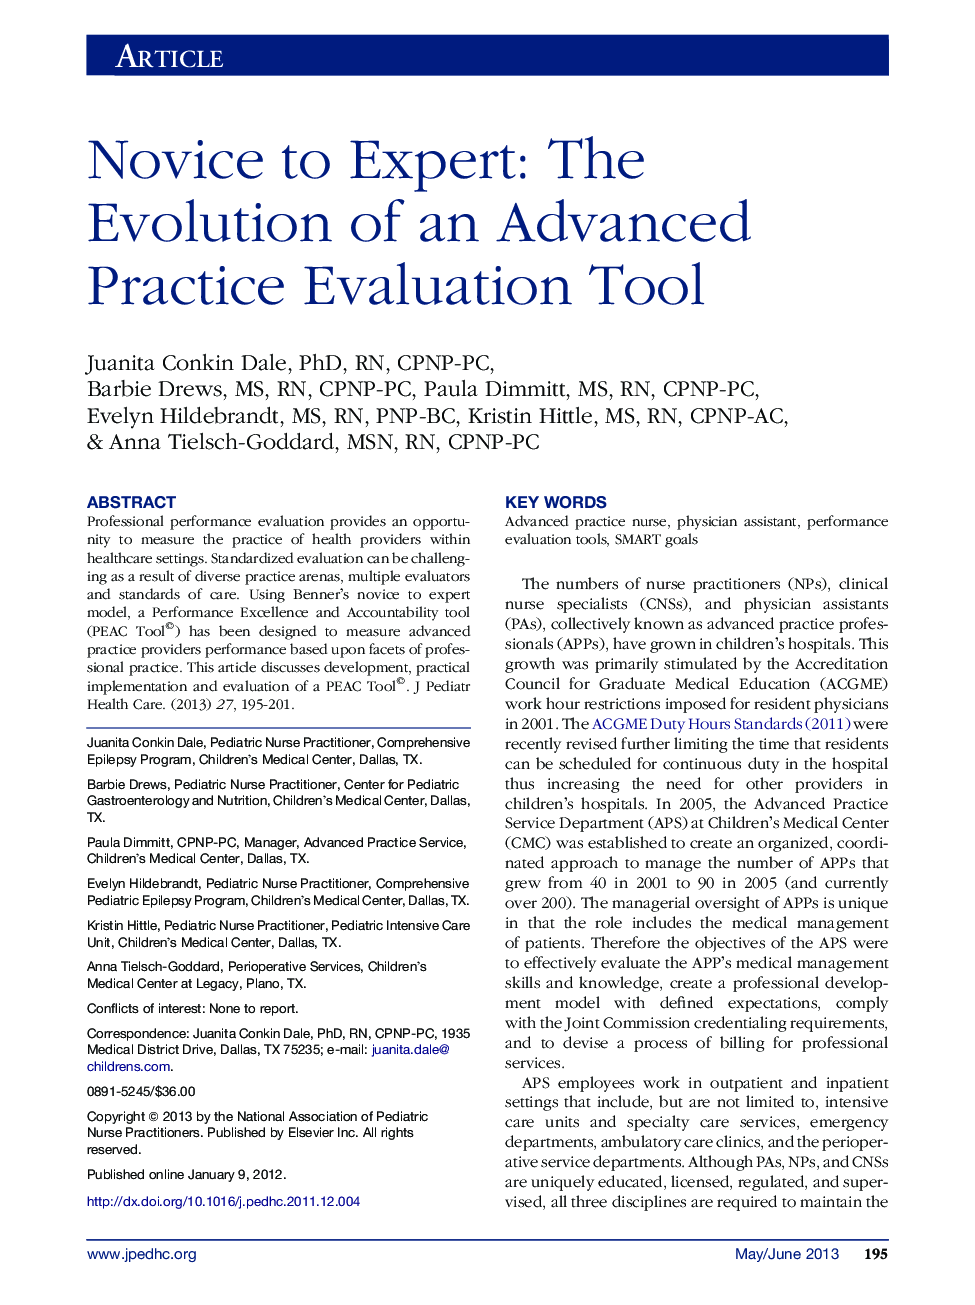 Novice to Expert: The Evolution of an Advanced Practice Evaluation Tool 